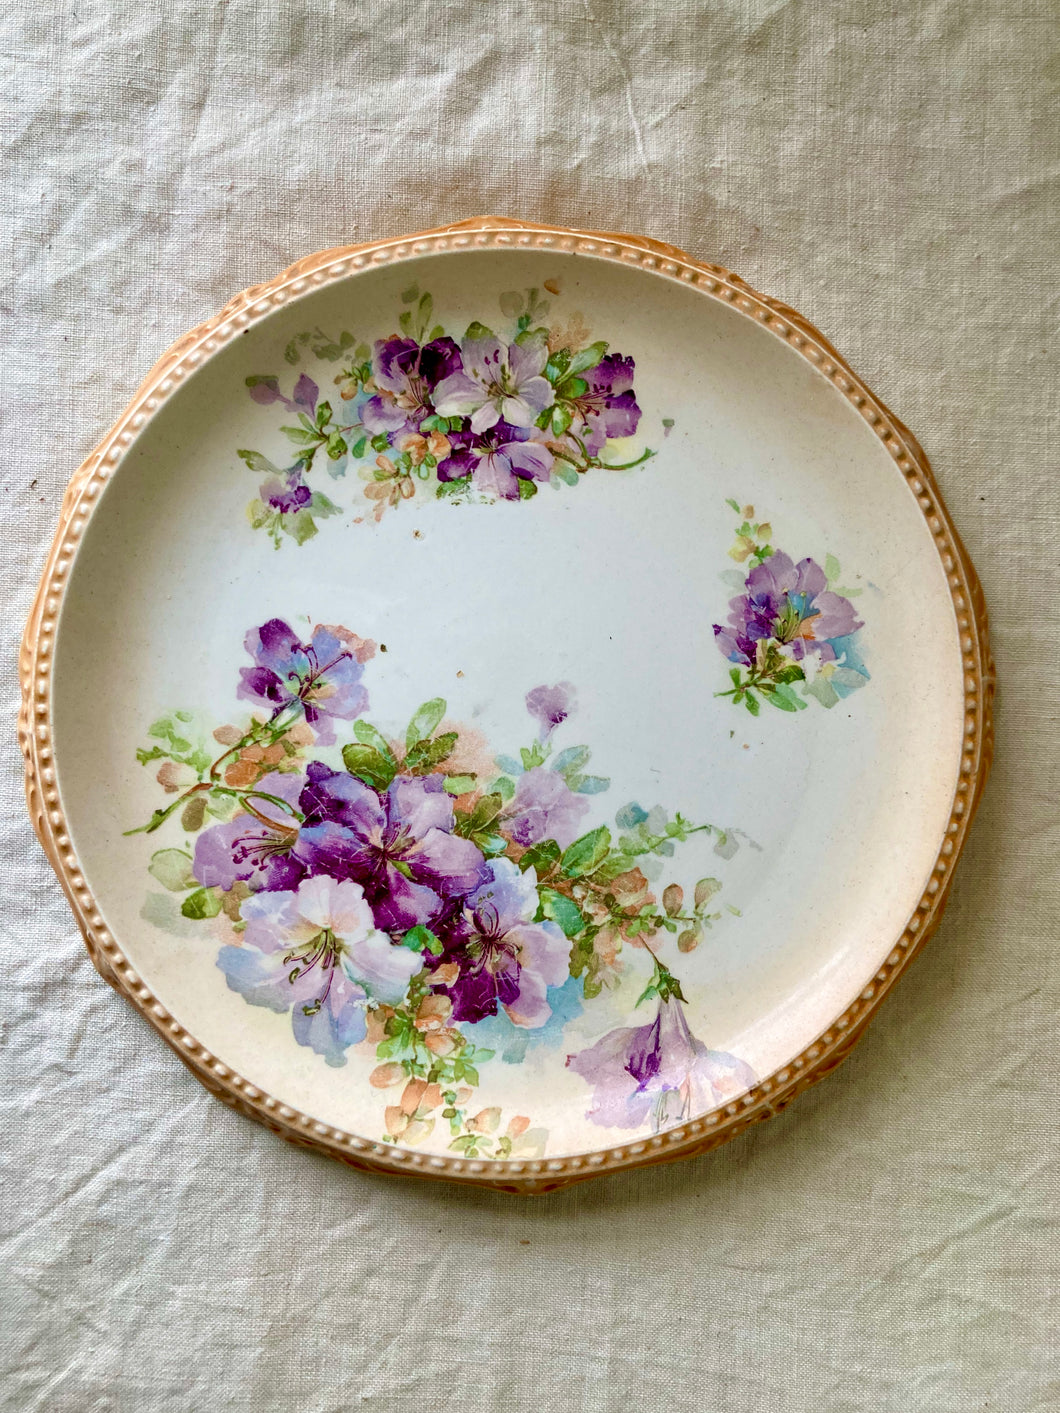 Antique Victorian floral bread or cake plate